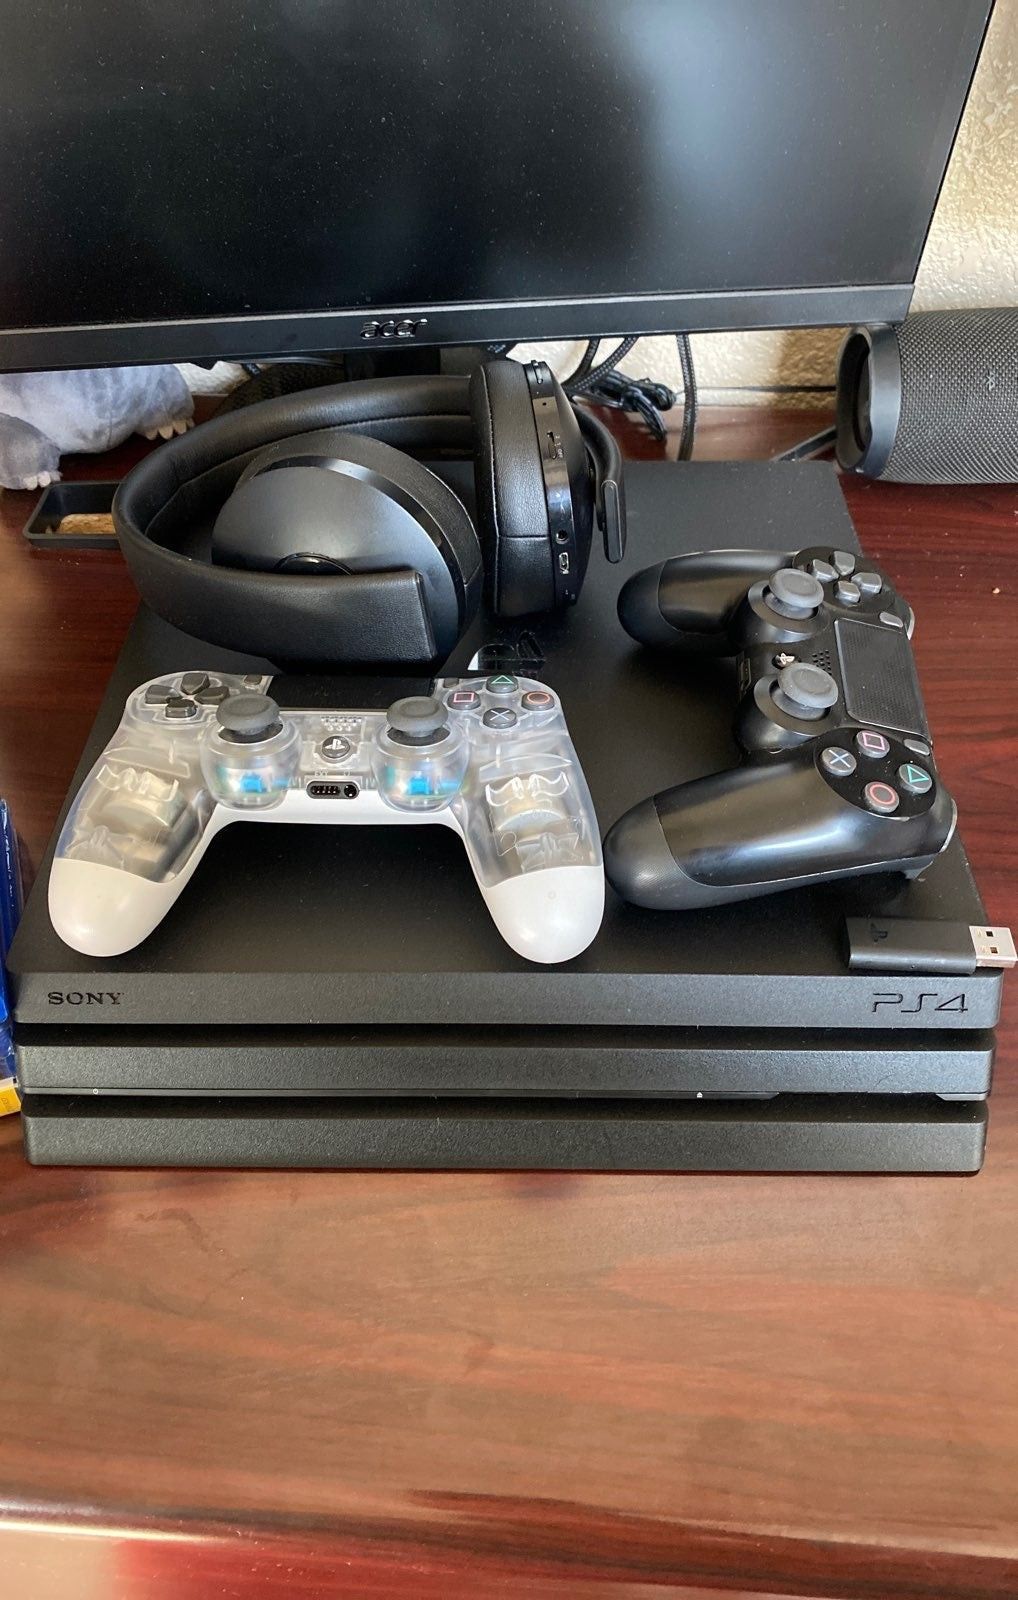 PS4 pro with double controllers and a headset.